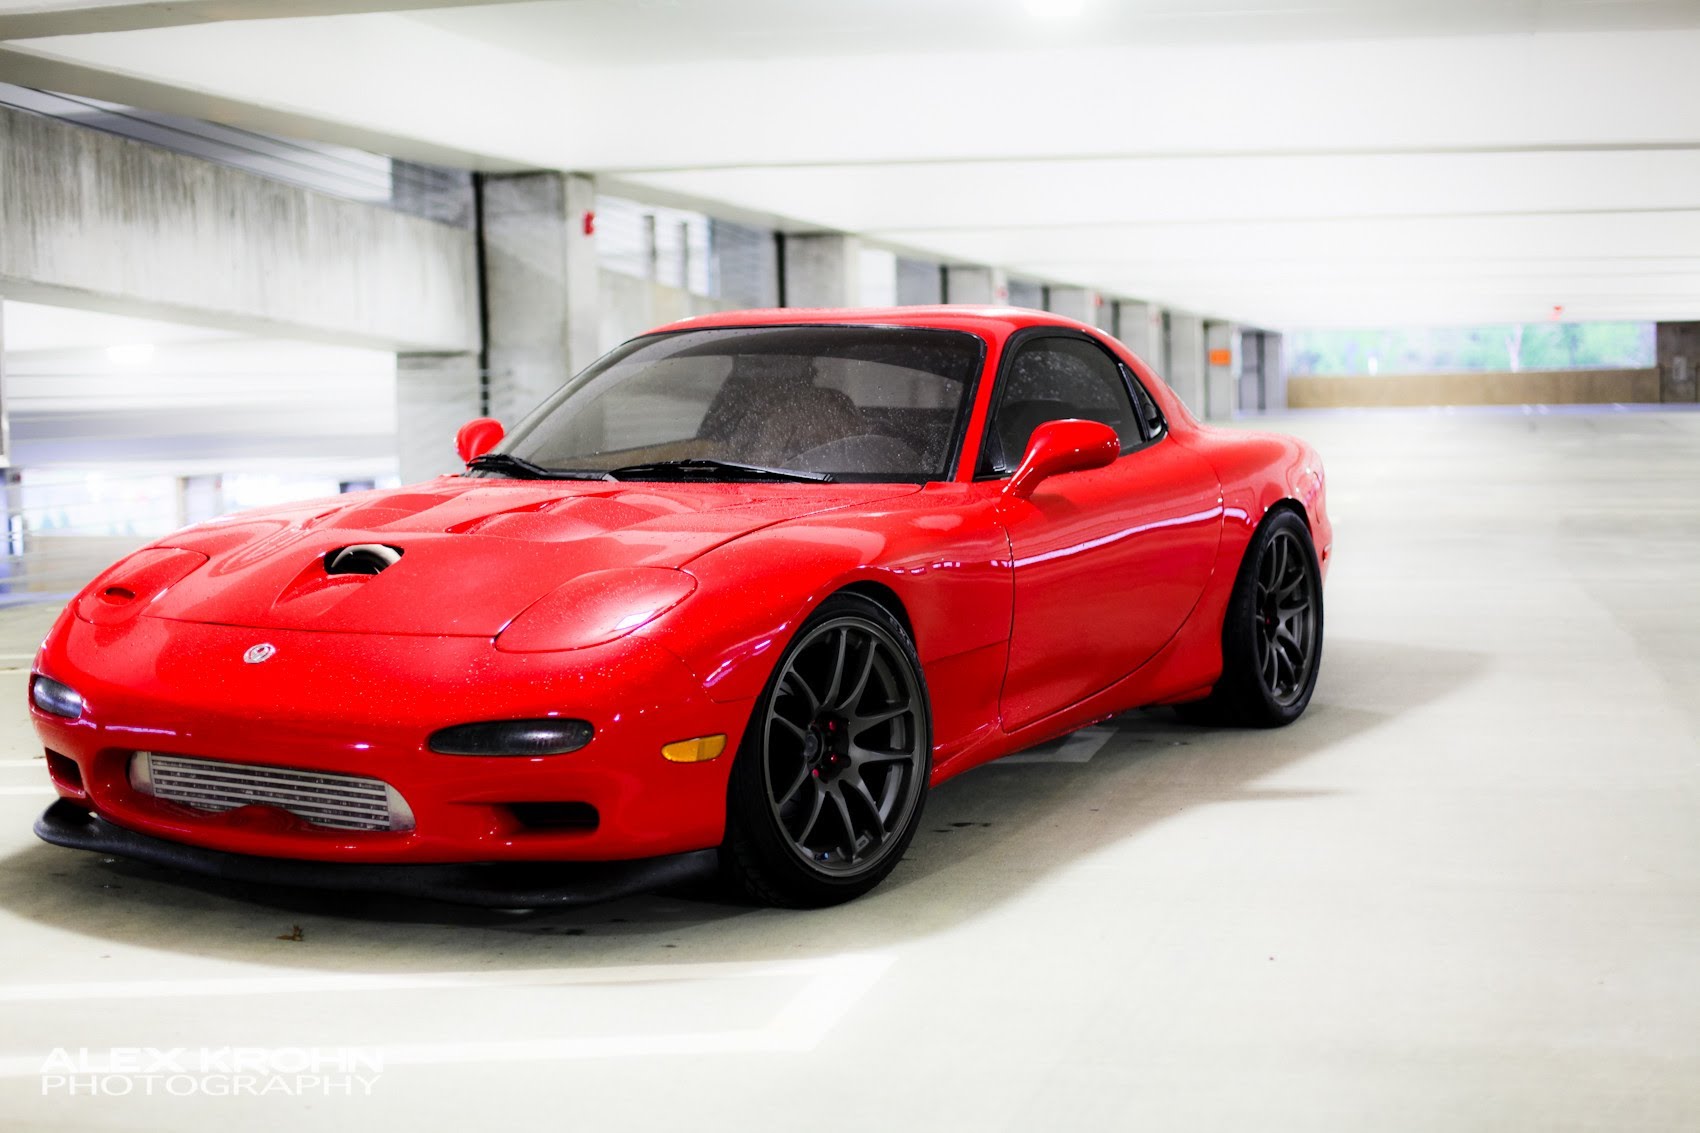 1993 Mazda Rx 7 Hd Wallpapers 7wallpapers Net Images, Photos, Reviews